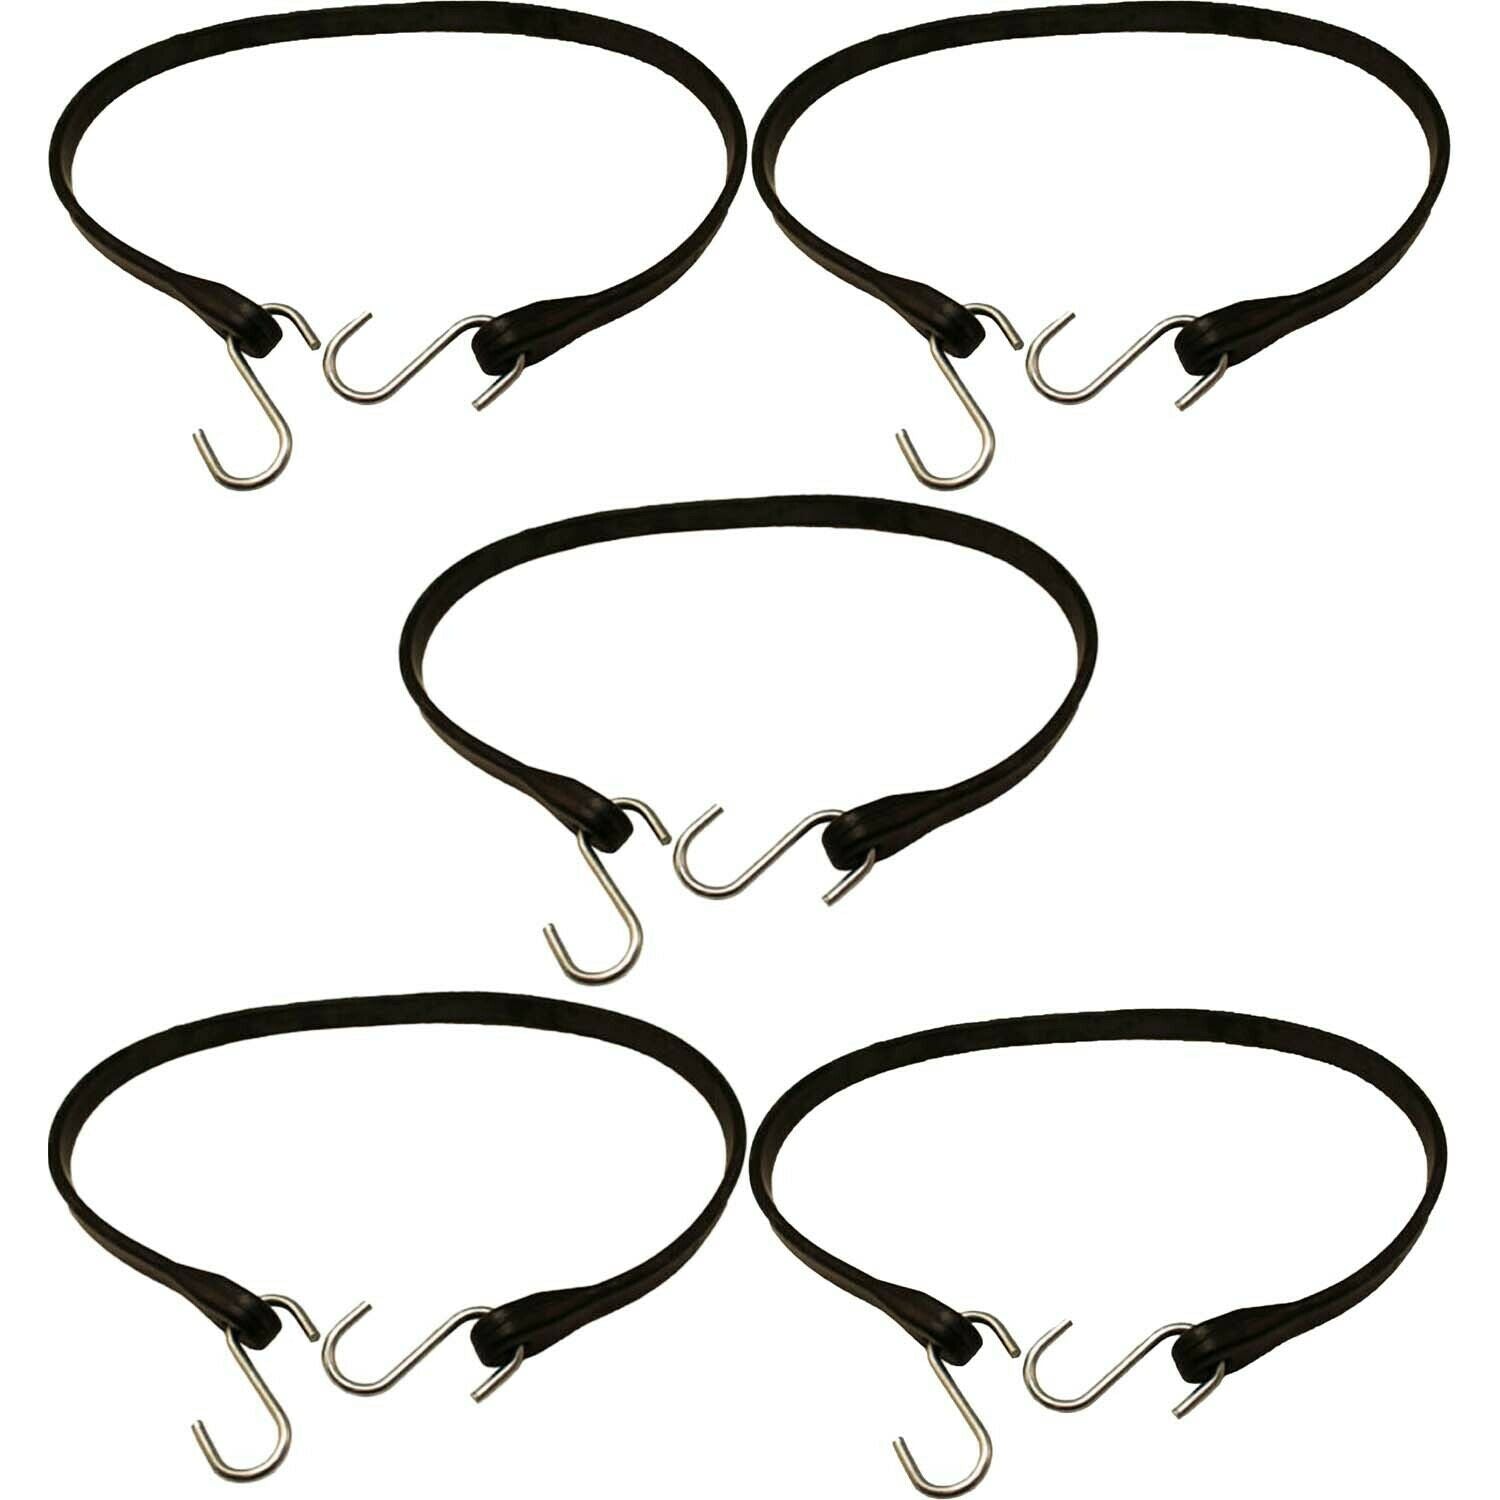 Peerless CC8415 15" EPDM Rubber Bungee Tarp Straps with Hooks Pack of 5